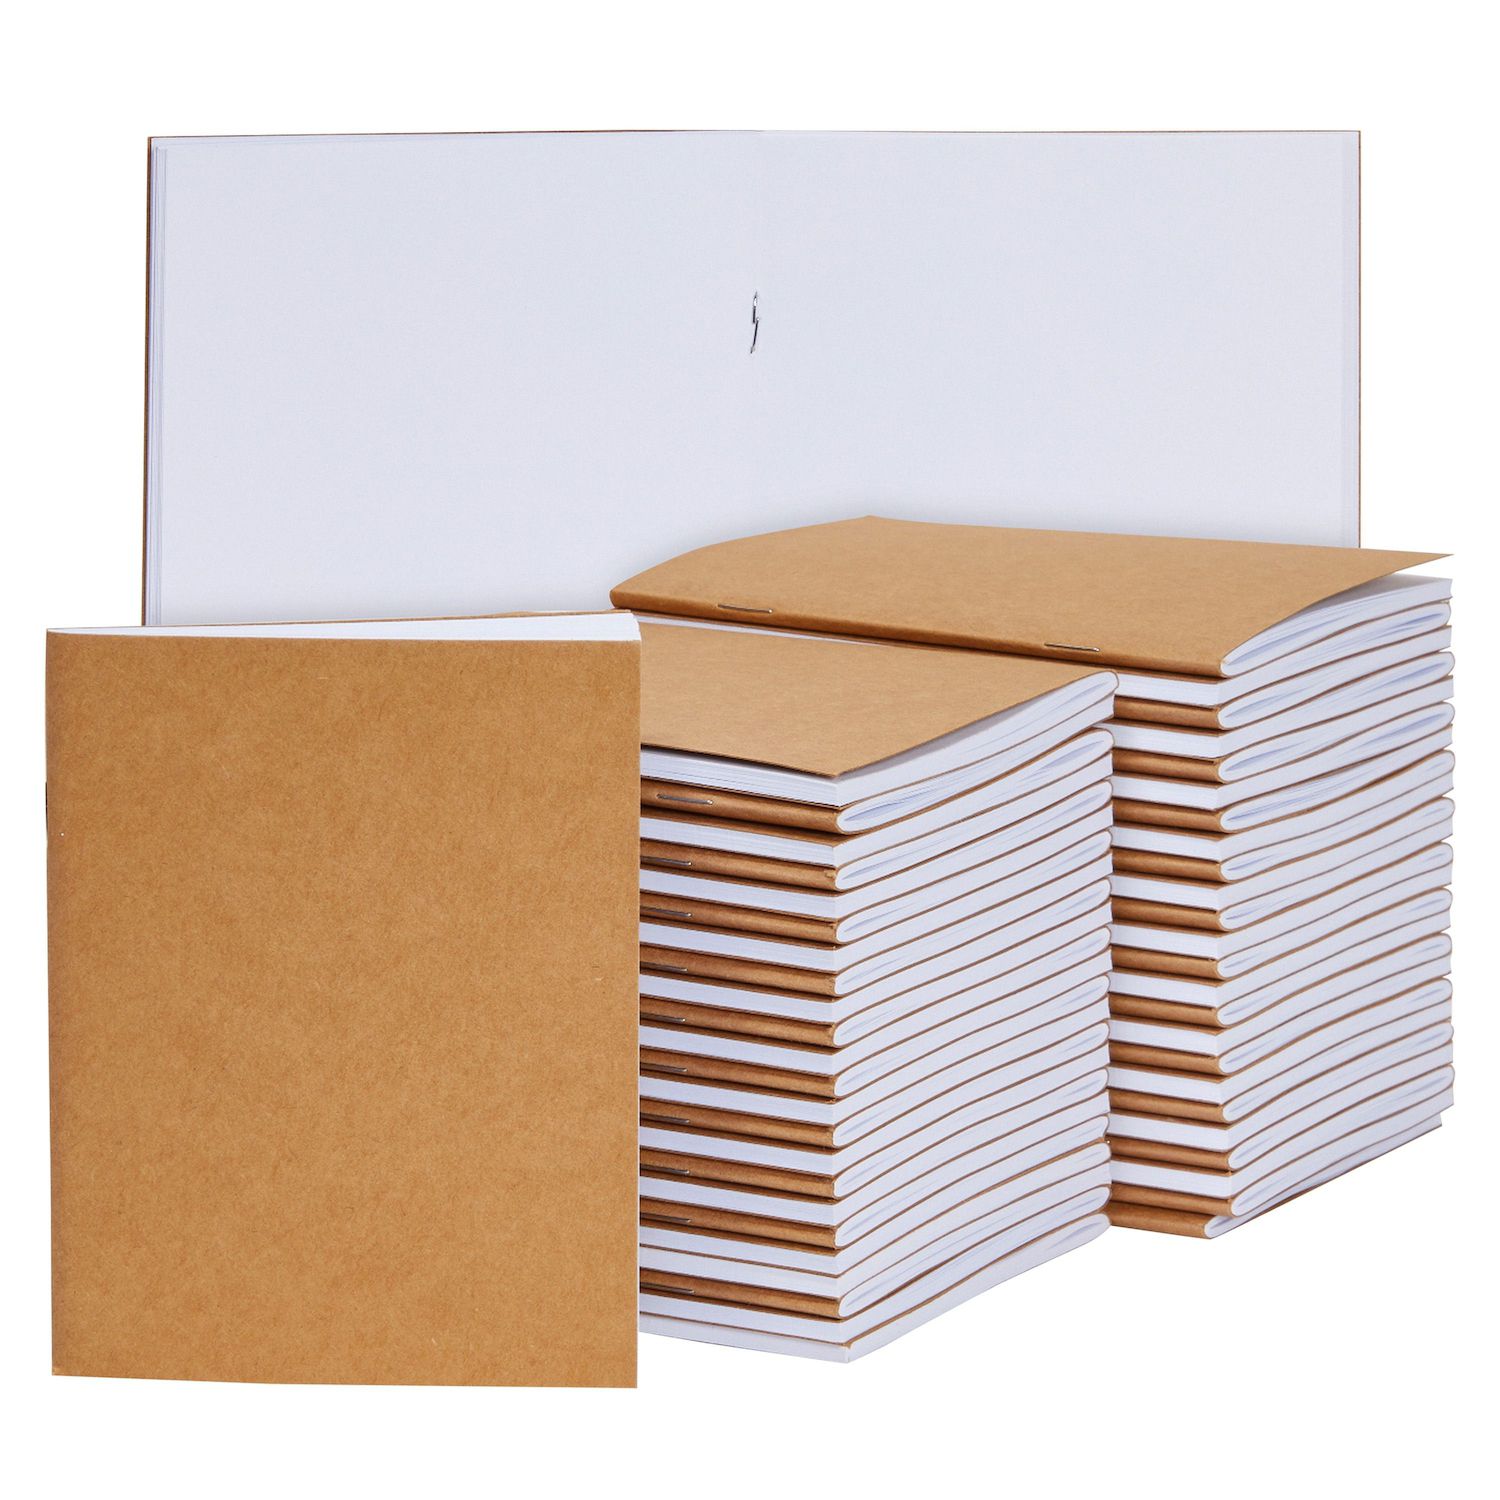 Blank Paper Notebook with 24 Sheets, Unlined Journal (4.25 x 5.5 In, 24  Pack)